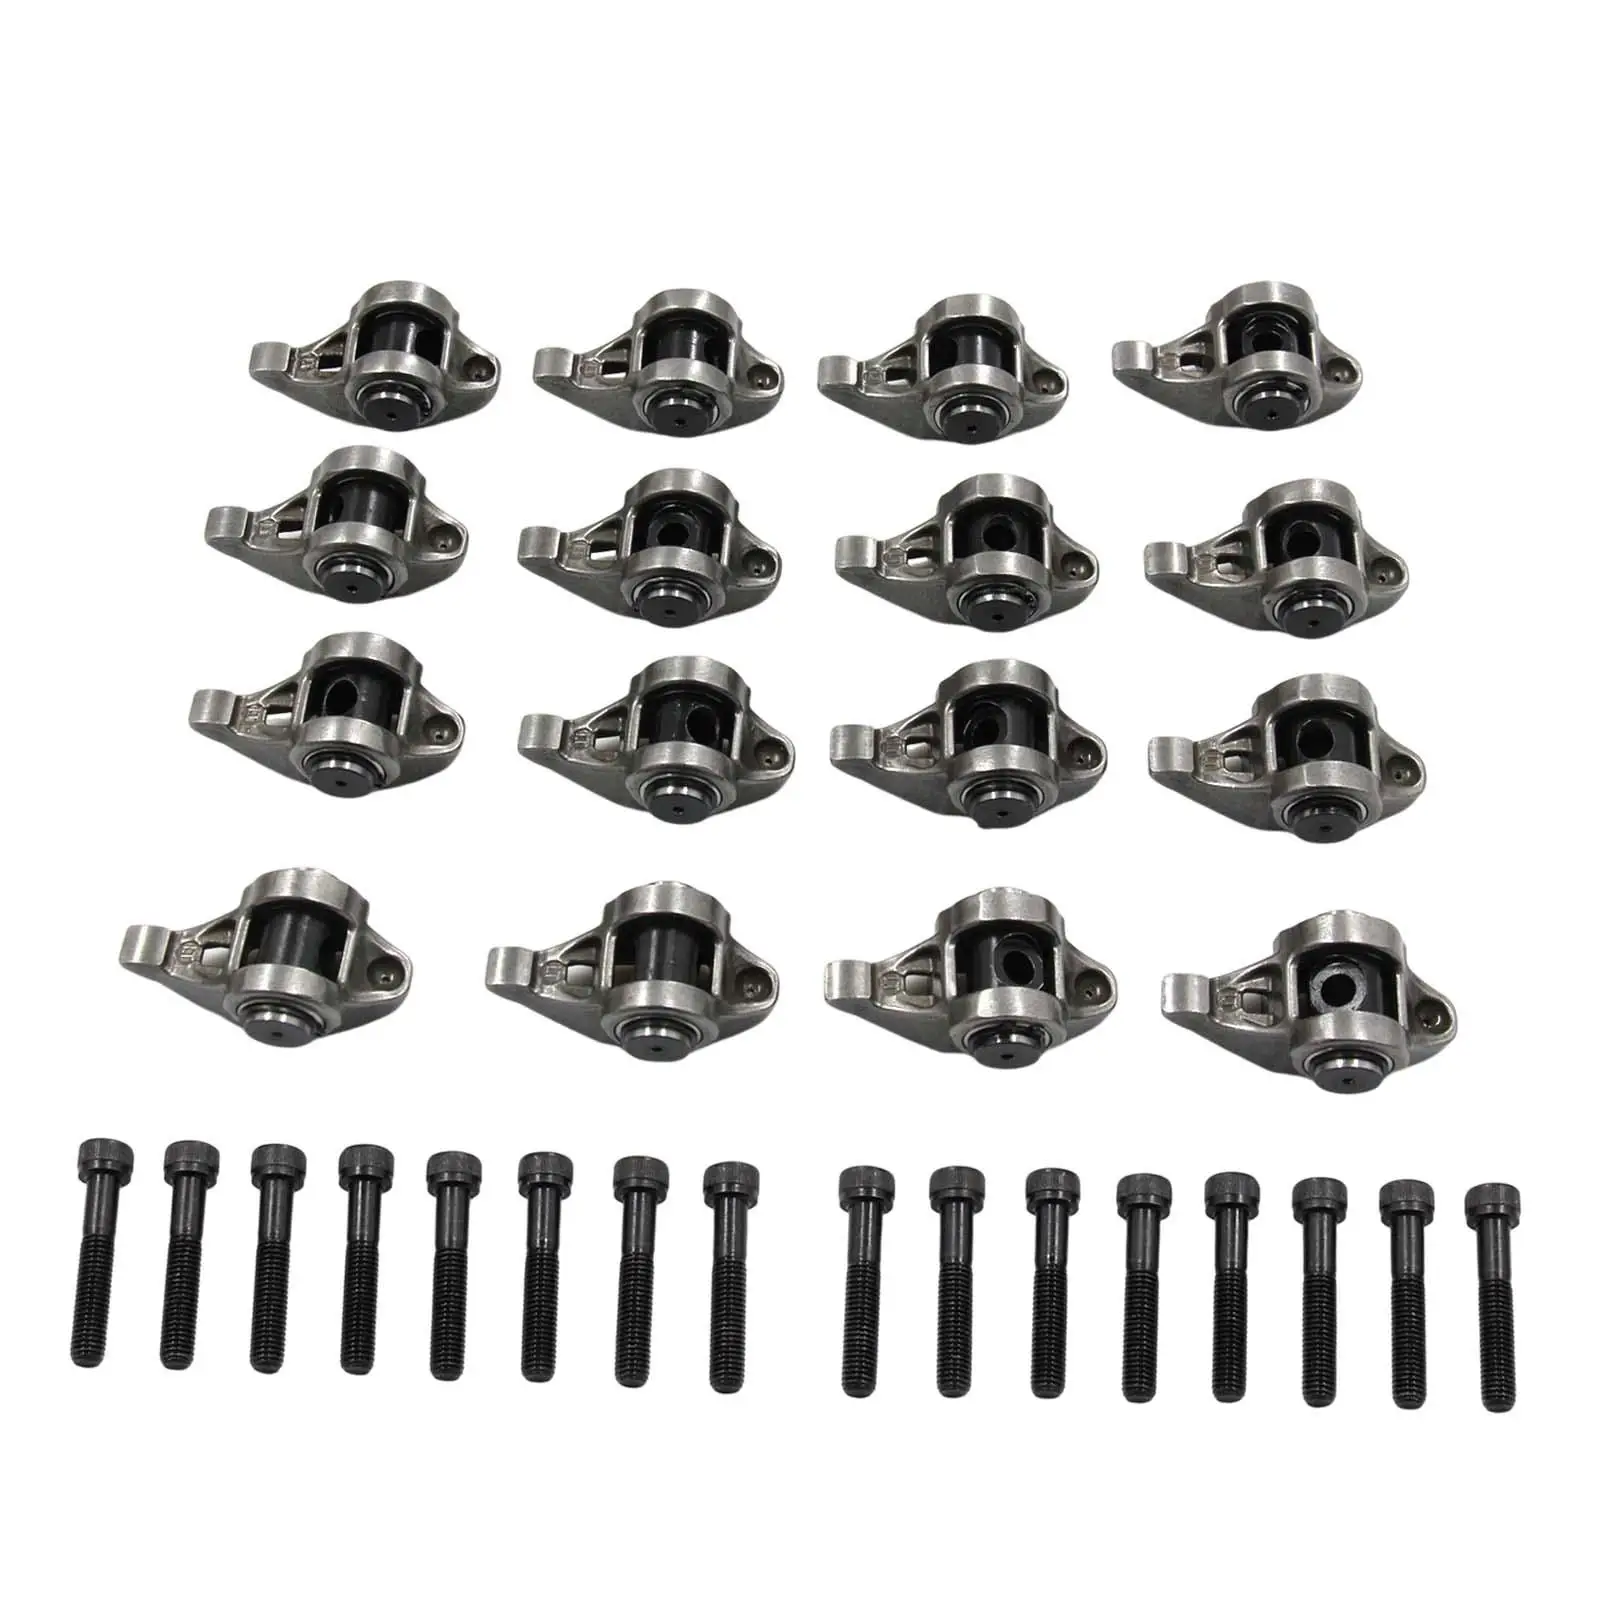 16 Pieces Rocker Arms and Bolts with Trunion Kit Installed 10214664 Accessory for Chevrolet LS1 LS2 LS3 LS6 LM7 L59 LM4 L33